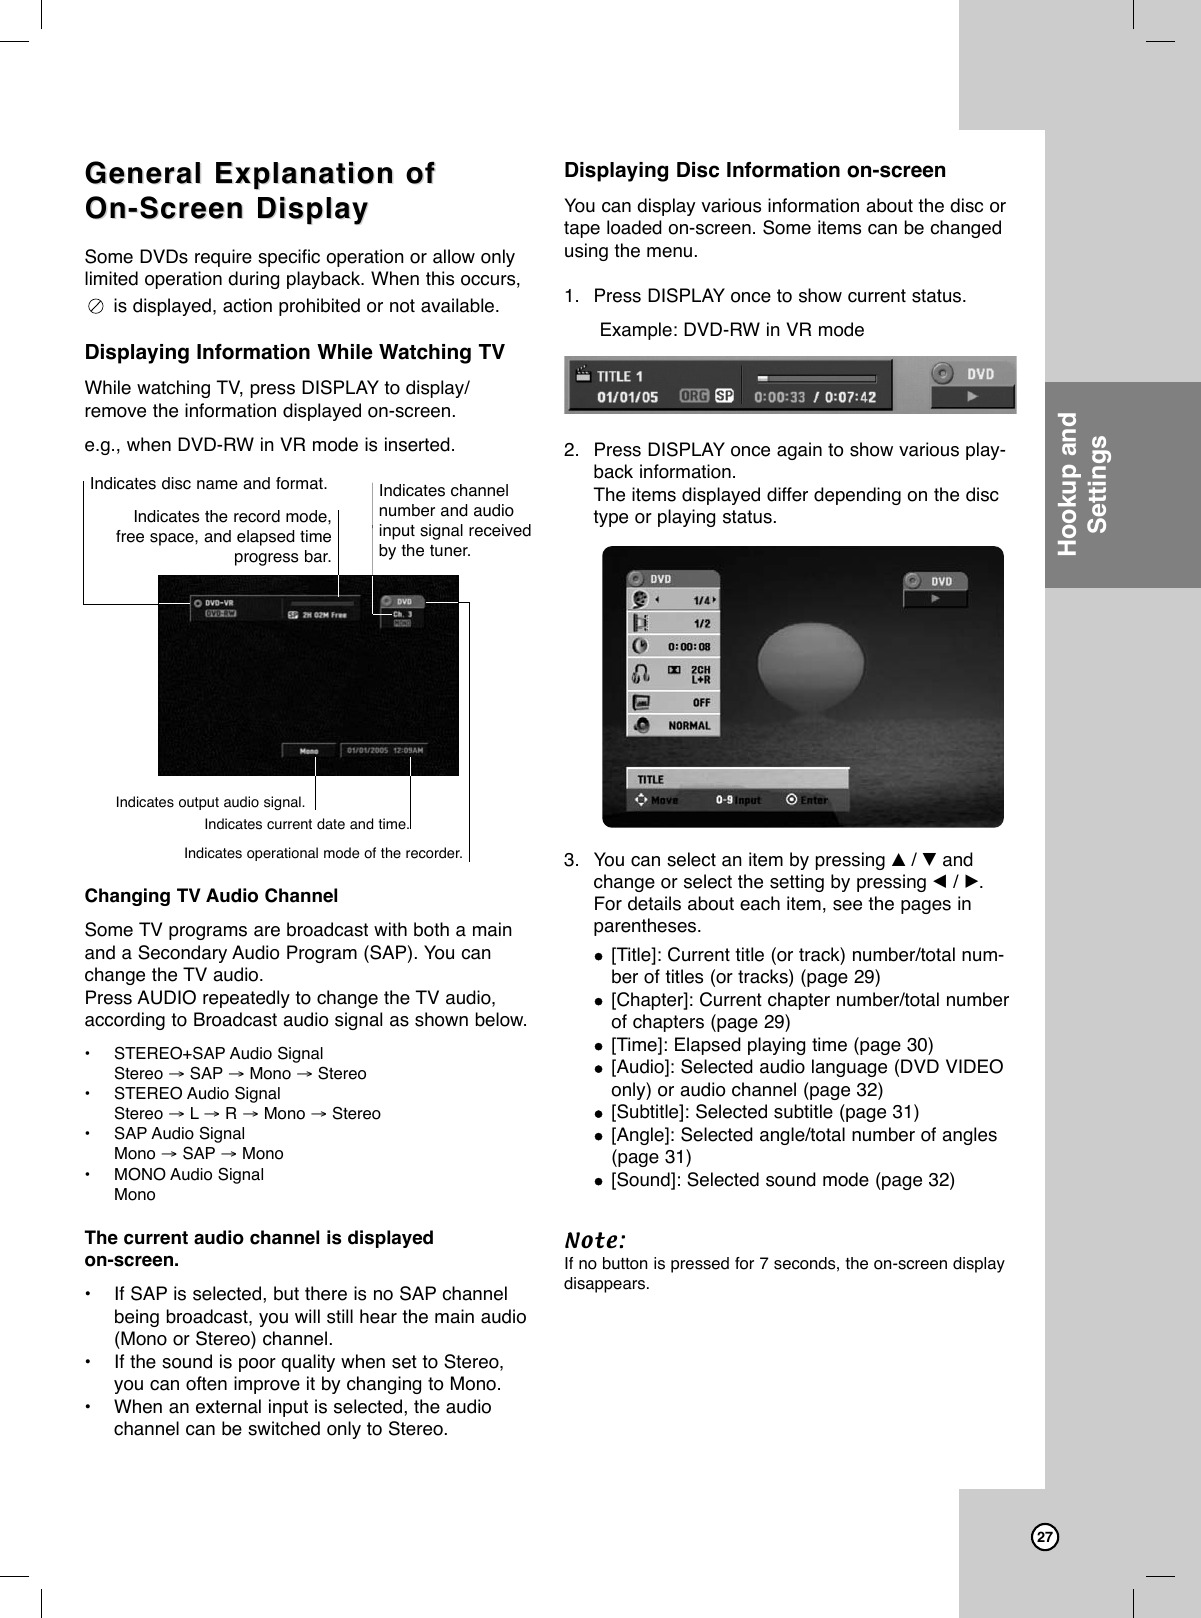 27General Explanation ofGeneral Explanation ofOn-Screen DisplayOn-Screen DisplaySome DVDs require specific operation or allow onlylimited operation during playback. When this occurs,is displayed, action prohibited or not available.Displaying Information While Watching TVWhile watching TV, press DISPLAY to display/remove the information displayed on-screen.e.g., when DVD-RW in VR mode is inserted.Changing TV Audio ChannelSome TV programs are broadcast with both a mainand a Secondary Audio Program (SAP). You canchange the TV audio.Press AUDIO repeatedly to change the TV audio,according to Broadcast audio signal as shown below. •STEREO+SAP Audio Signal Stereo →SAP →Mono →Stereo•STEREO Audio Signal Stereo →L→R →Mono →Stereo•SAP Audio Signal Mono →SAP →Mono•MONO Audio Signal MonoThe current audio channel is displayed on-screen.•If SAP is selected, but there is no SAP channelbeing broadcast, you will still hear the main audio(Mono or Stereo) channel.•If the sound is poor quality when set to Stereo,you can often improve it by changing to Mono.•When an external input is selected, the audiochannel can be switched only to Stereo.Displaying Disc Information on-screenYou can display various information about the disc ortape loaded on-screen. Some items can be changedusing the menu.1. Press DISPLAY once to show current status.Example: DVD-RW in VR mode2. Press DISPLAY once again to show various play-back information.The items displayed differ depending on the disctype or playing status. 3. You can select an item by pressing v/ Vandchange or select the setting by pressing b/ B.For details about each item, see the pages inparentheses.[Title]: Current title (or track) number/total num-ber of titles (or tracks) (page 29)[Chapter]: Current chapter number/total numberof chapters (page 29)[Time]: Elapsed playing time (page 30)[Audio]: Selected audio language (DVD VIDEOonly) or audio channel (page 32)[Subtitle]: Selected subtitle (page 31)[Angle]: Selected angle/total number of angles(page 31)[Sound]: Selected sound mode (page 32)Note:If no button is pressed for 7 seconds, the on-screen displaydisappears.Indicates disc name and format. Indicates channelnumber and audioinput signal receivedby the tuner.Indicates the record mode, free space, and elapsed timeprogress bar.Indicates current date and time.Indicates operational mode of the recorder.Indicates output audio signal.Hookup andSettings